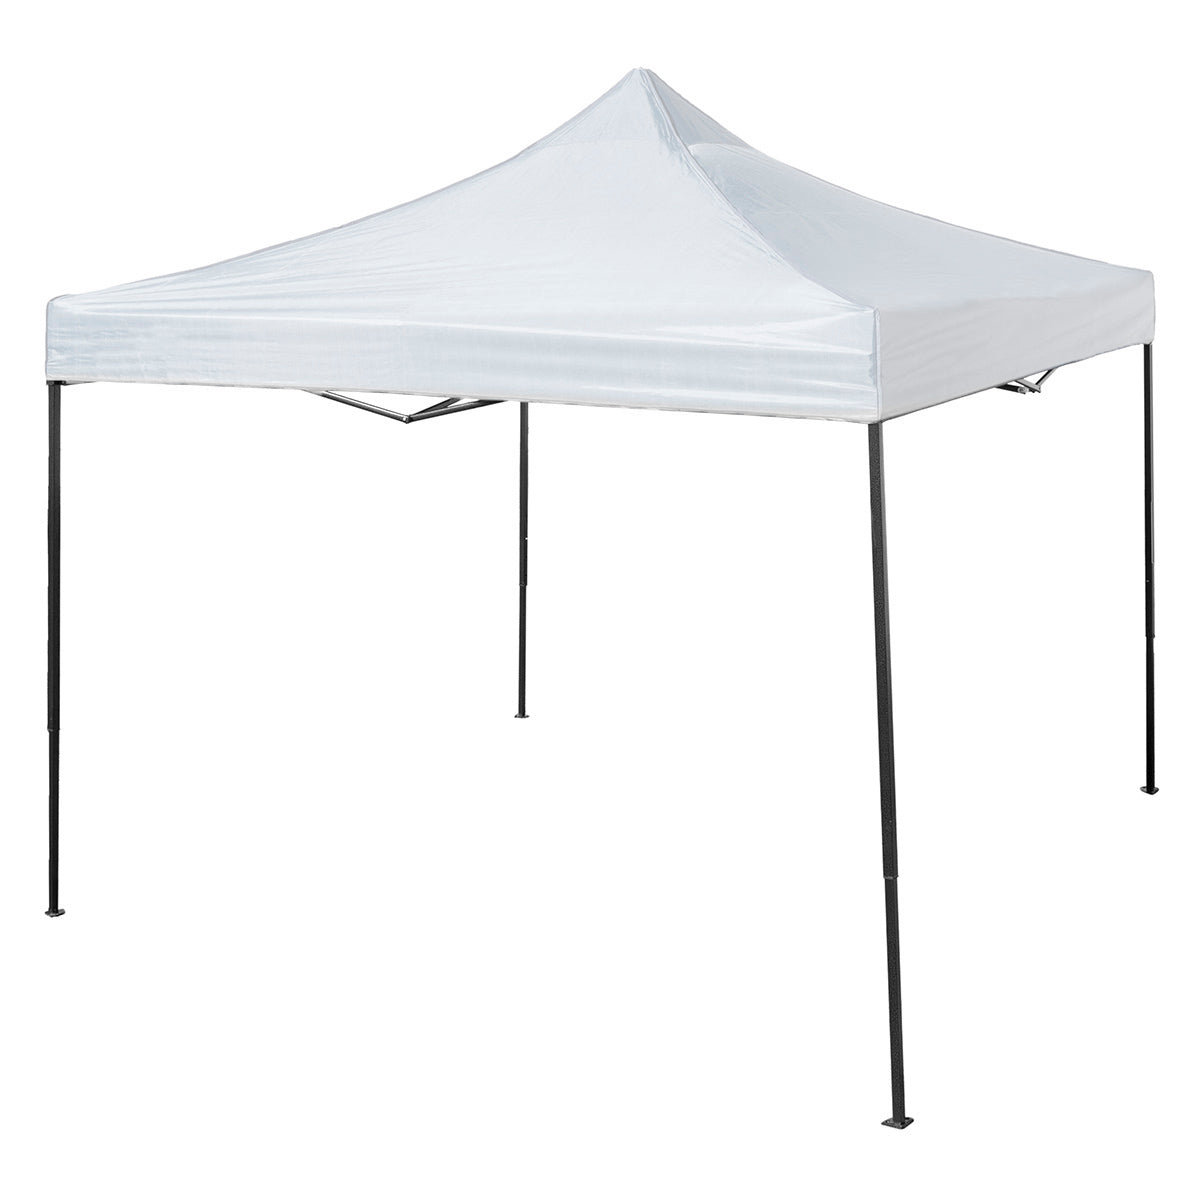 Image of Trapper's Peak Portable Pop Up Canopy 10 x 10 (White)